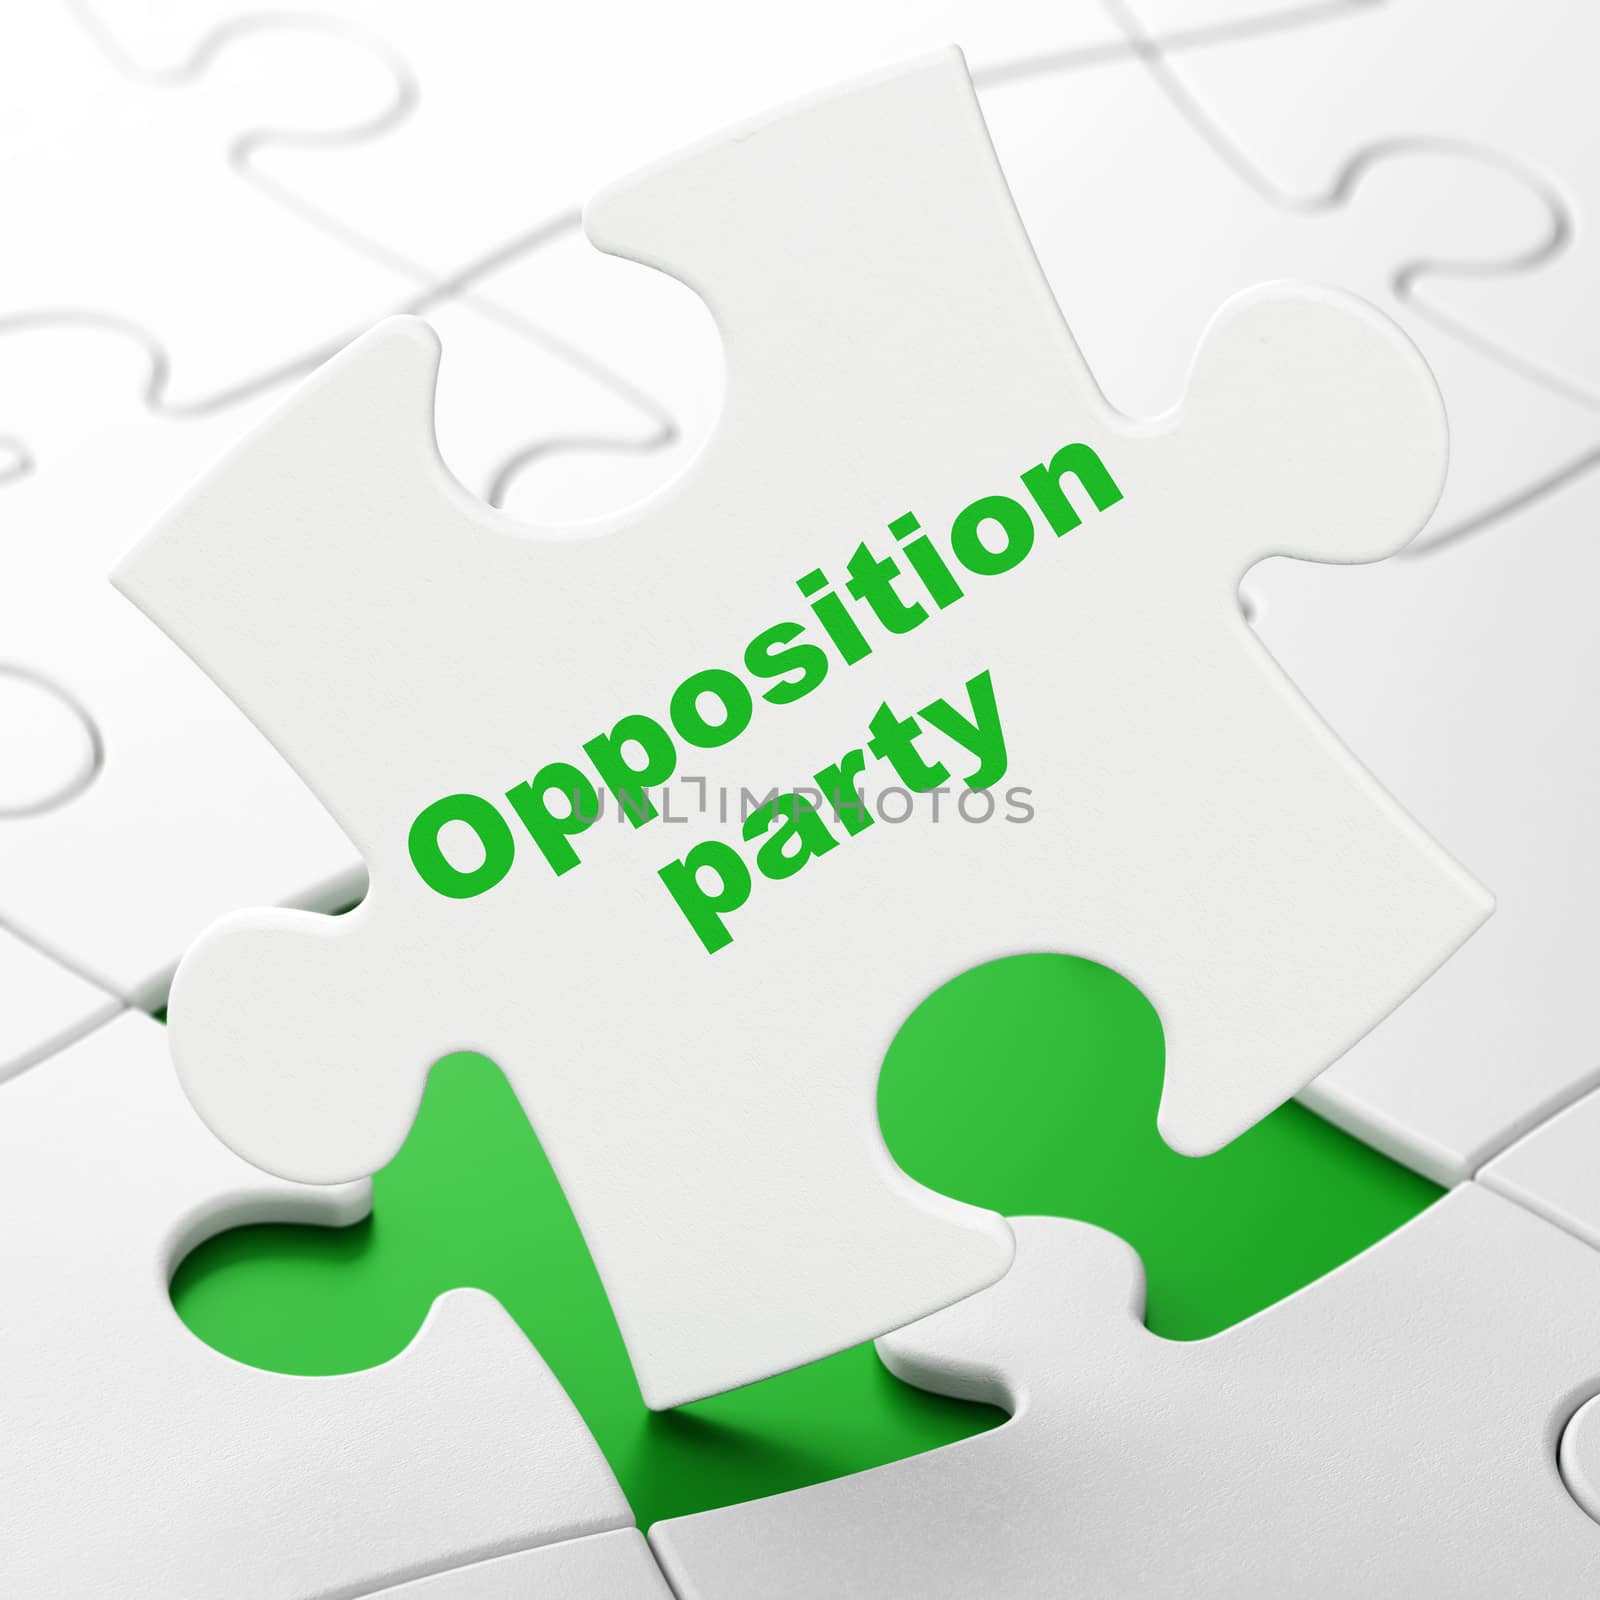 Politics concept: Opposition Party on White puzzle pieces background, 3D rendering